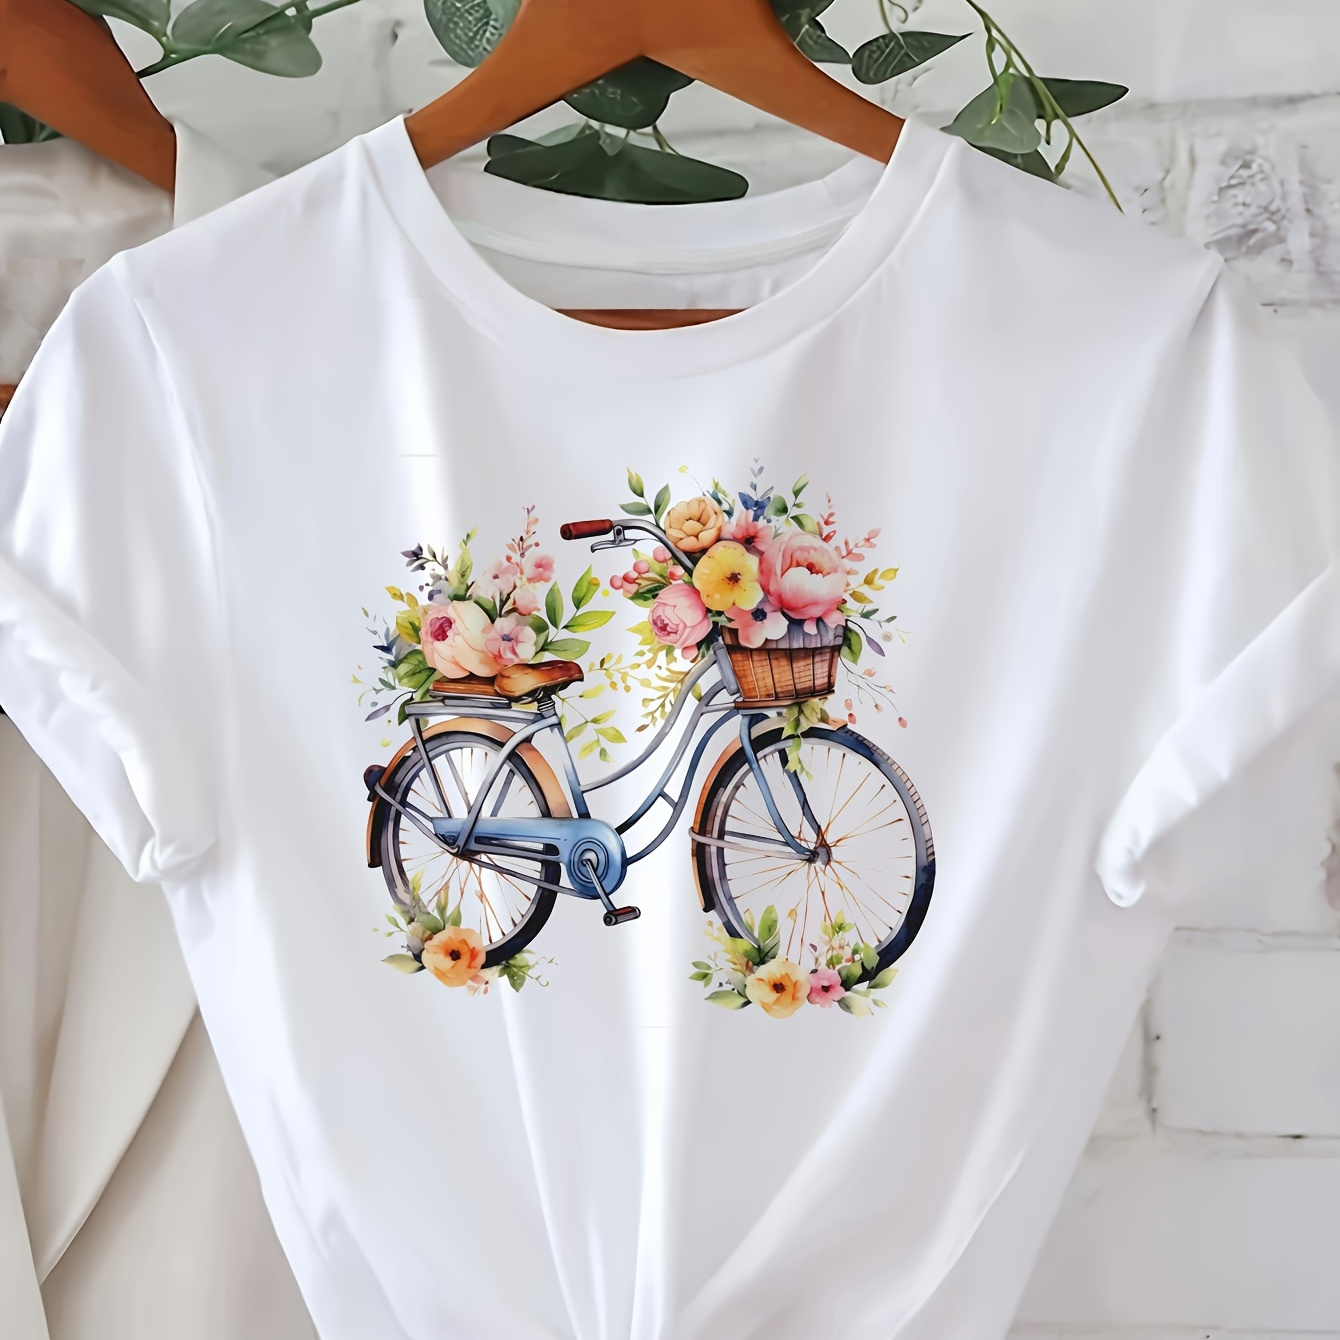 

Floral & Bicycle Print Crew Neck T-shirt, Casual Short Sleeve Summer Daily Top, Women's Clothing